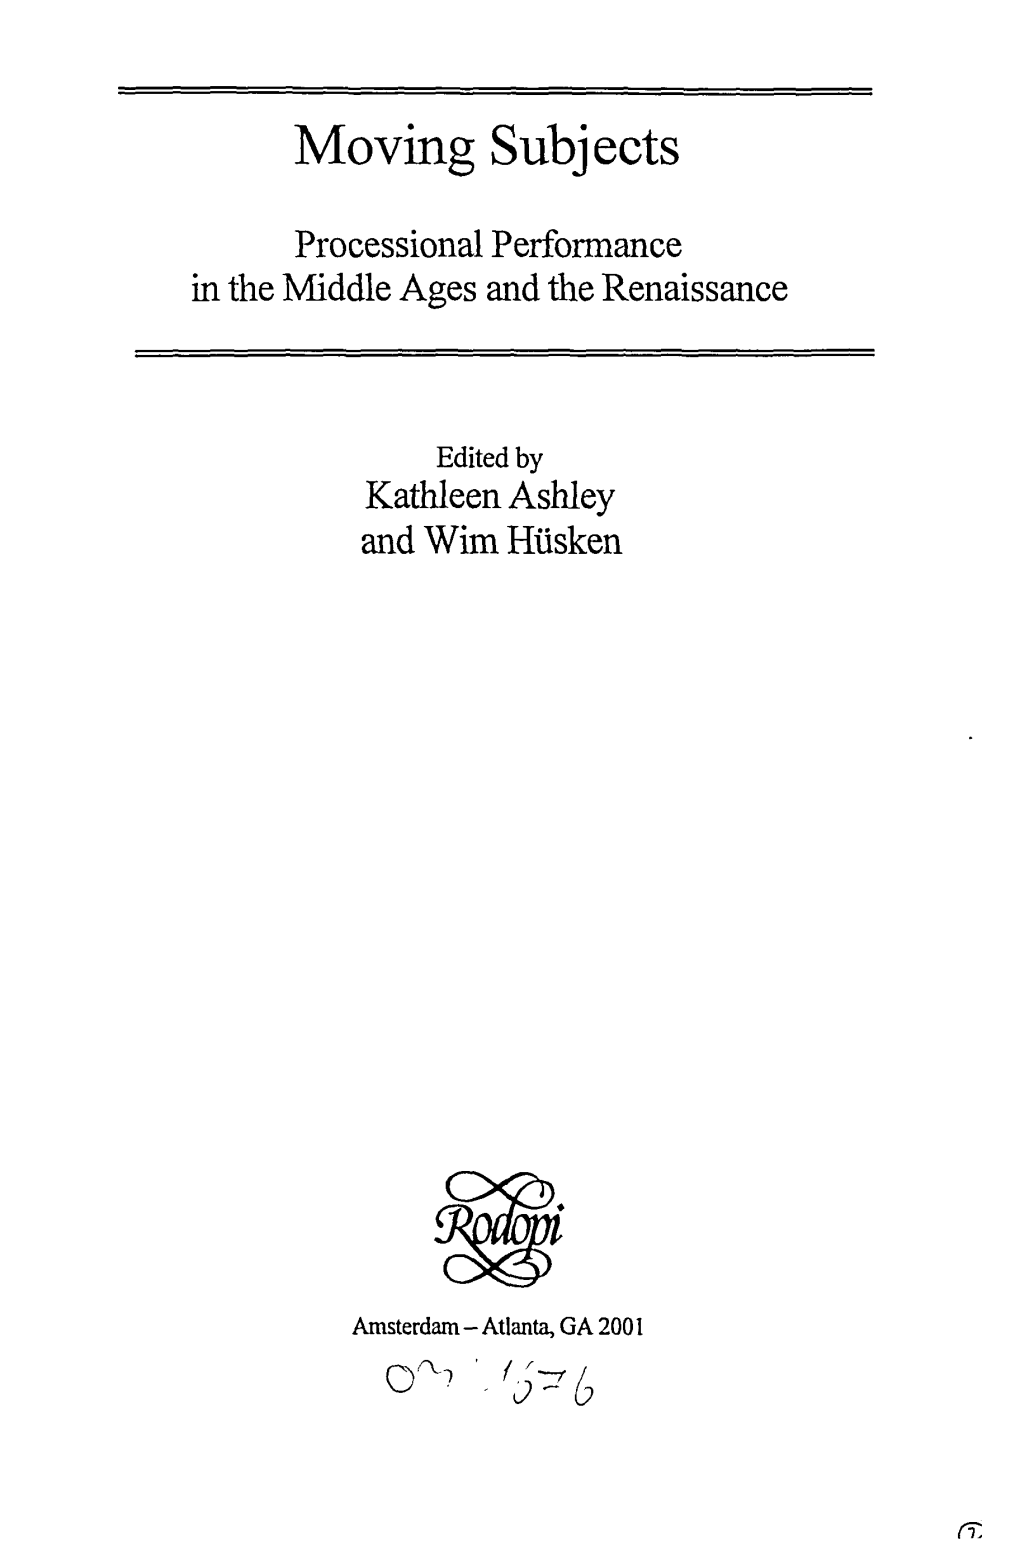 Processional Performance in the Middle Ages and the Renaissance